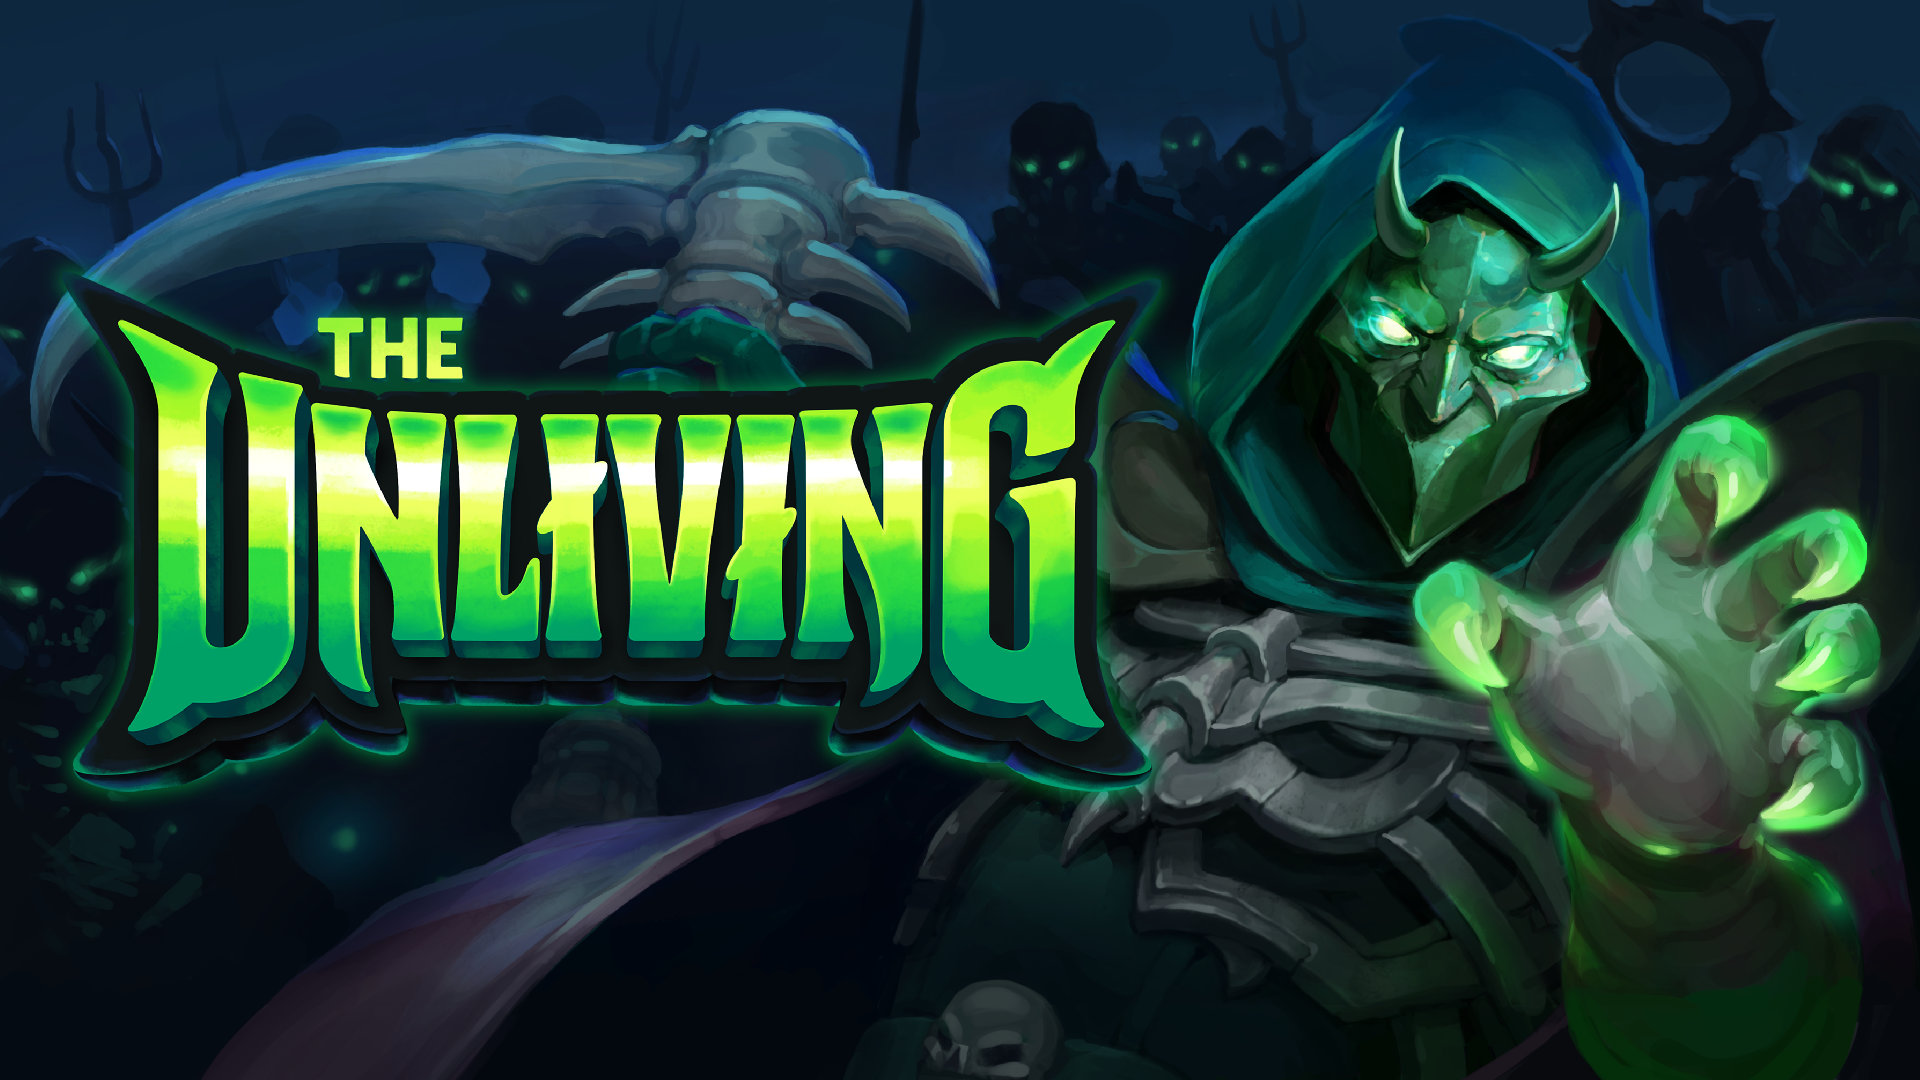 The Unliving artwork of the game's logo and a necromancer in a metal mask with glowing eyes carrying a bone scythe gesturing at the viewer with a glowing clawed hand.